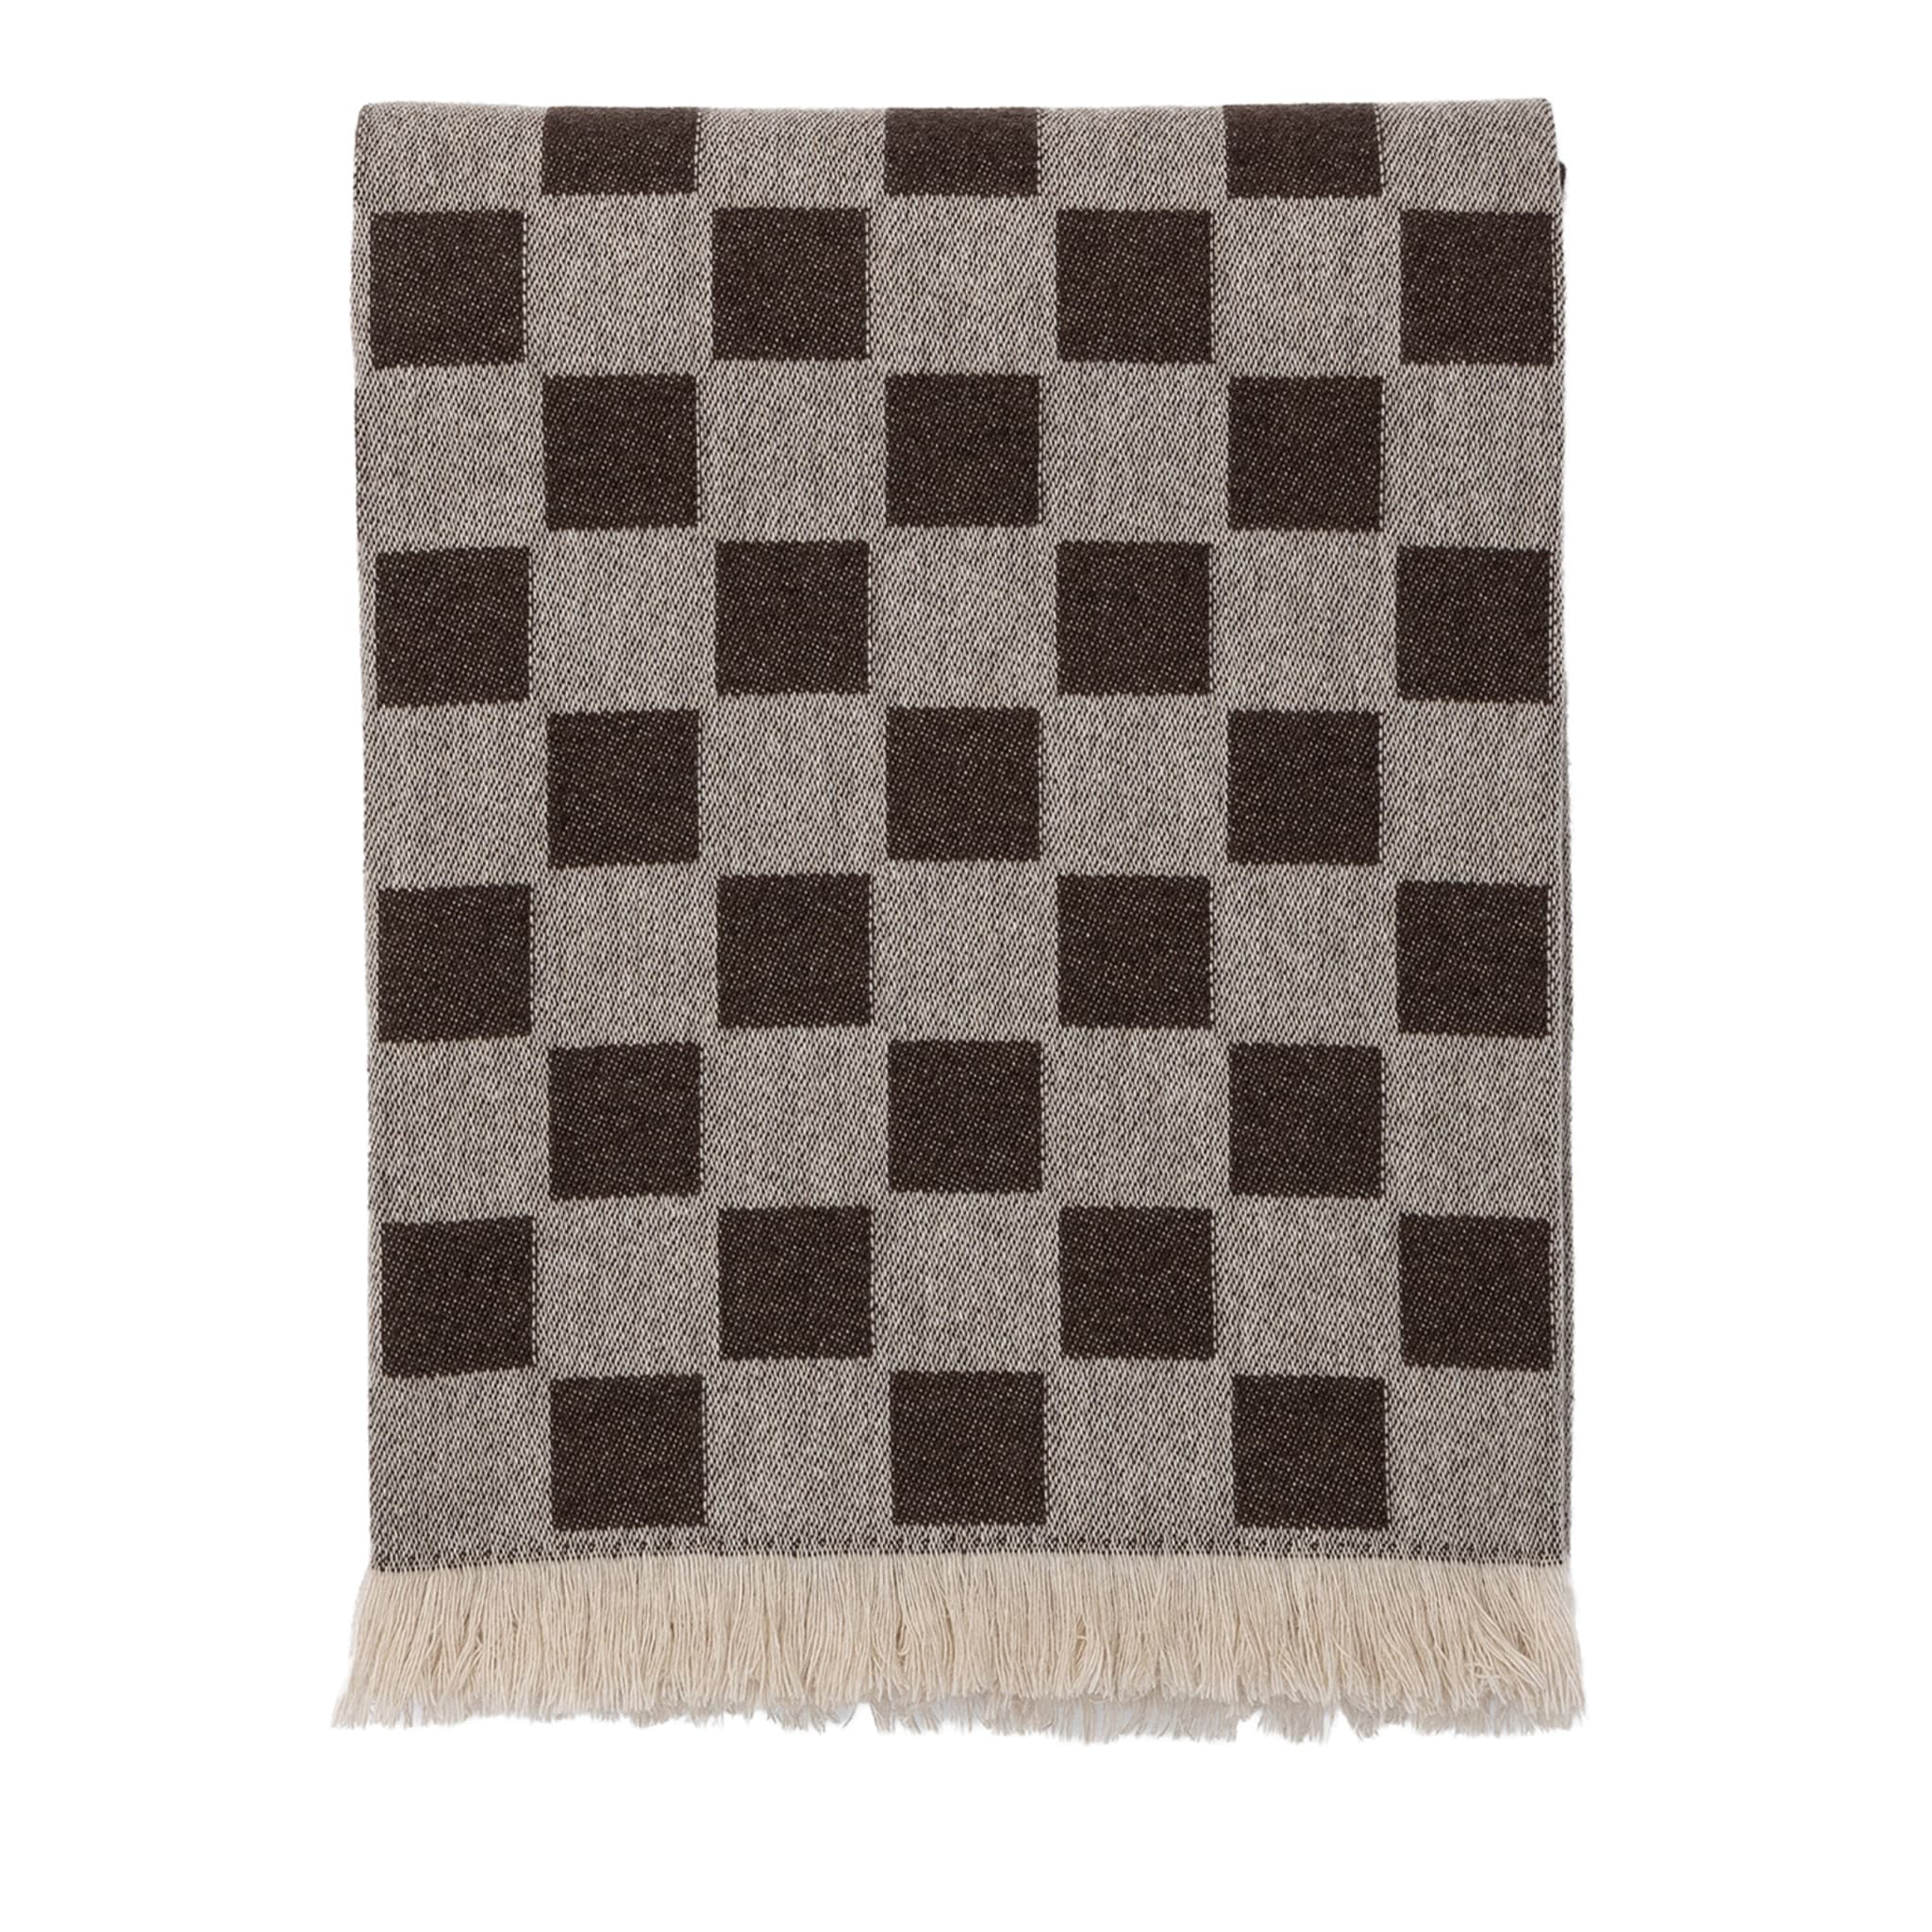 Fringed Brown Chessboard-Patterned Blanket - Main view